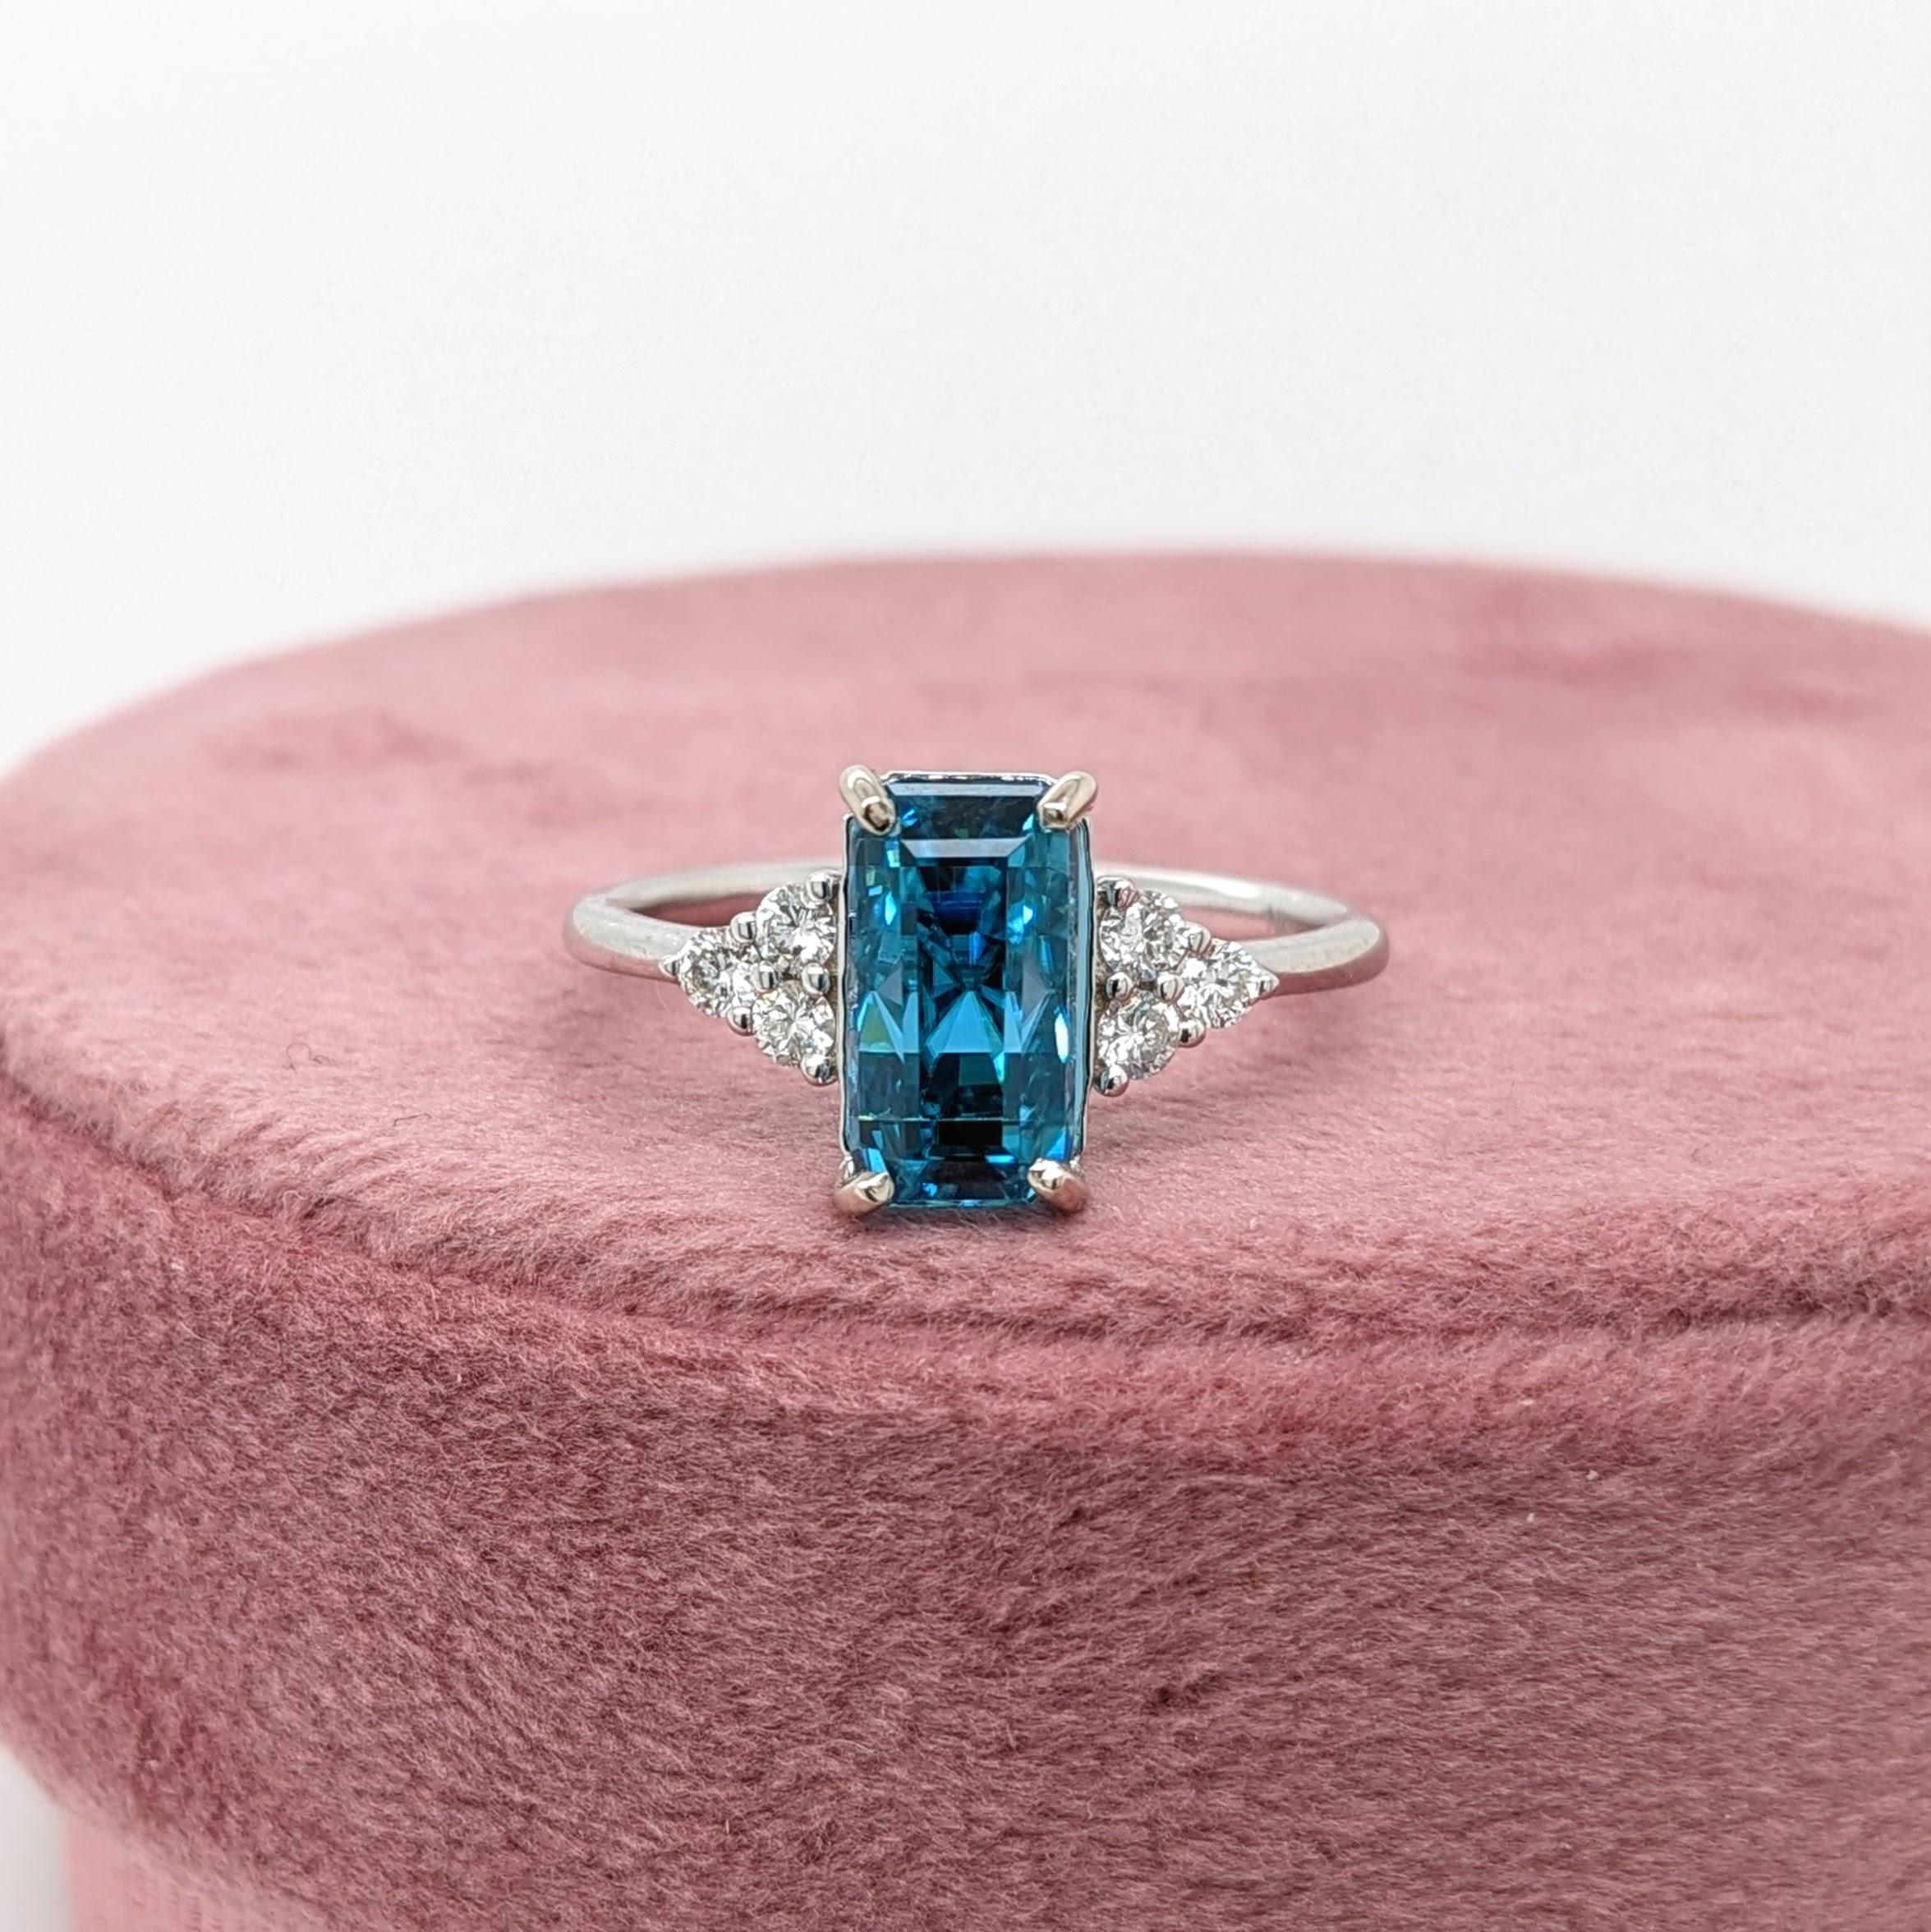 This statement ring features a gorgeous sparkling natural blue zircon in 14K solid white gold with a trio of diamond accents on either side making a cute minimalist design. A gorgeous ring for a modern bride, a December baby, or a lover of things